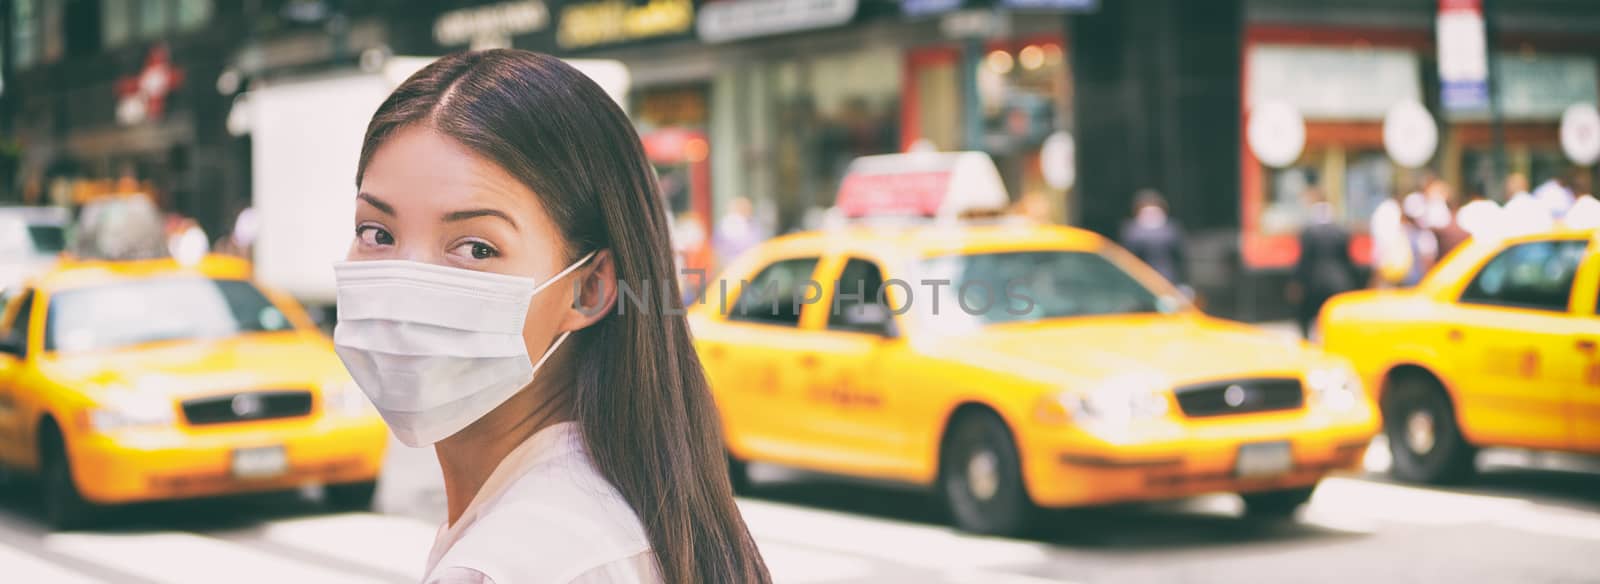 Corona virus travel ban China woman tourist walking in New York city street wearing surgical mask coronavirus protection, outbreak spreading scare. Panoramic banner background of traffic taxi cabs by Maridav